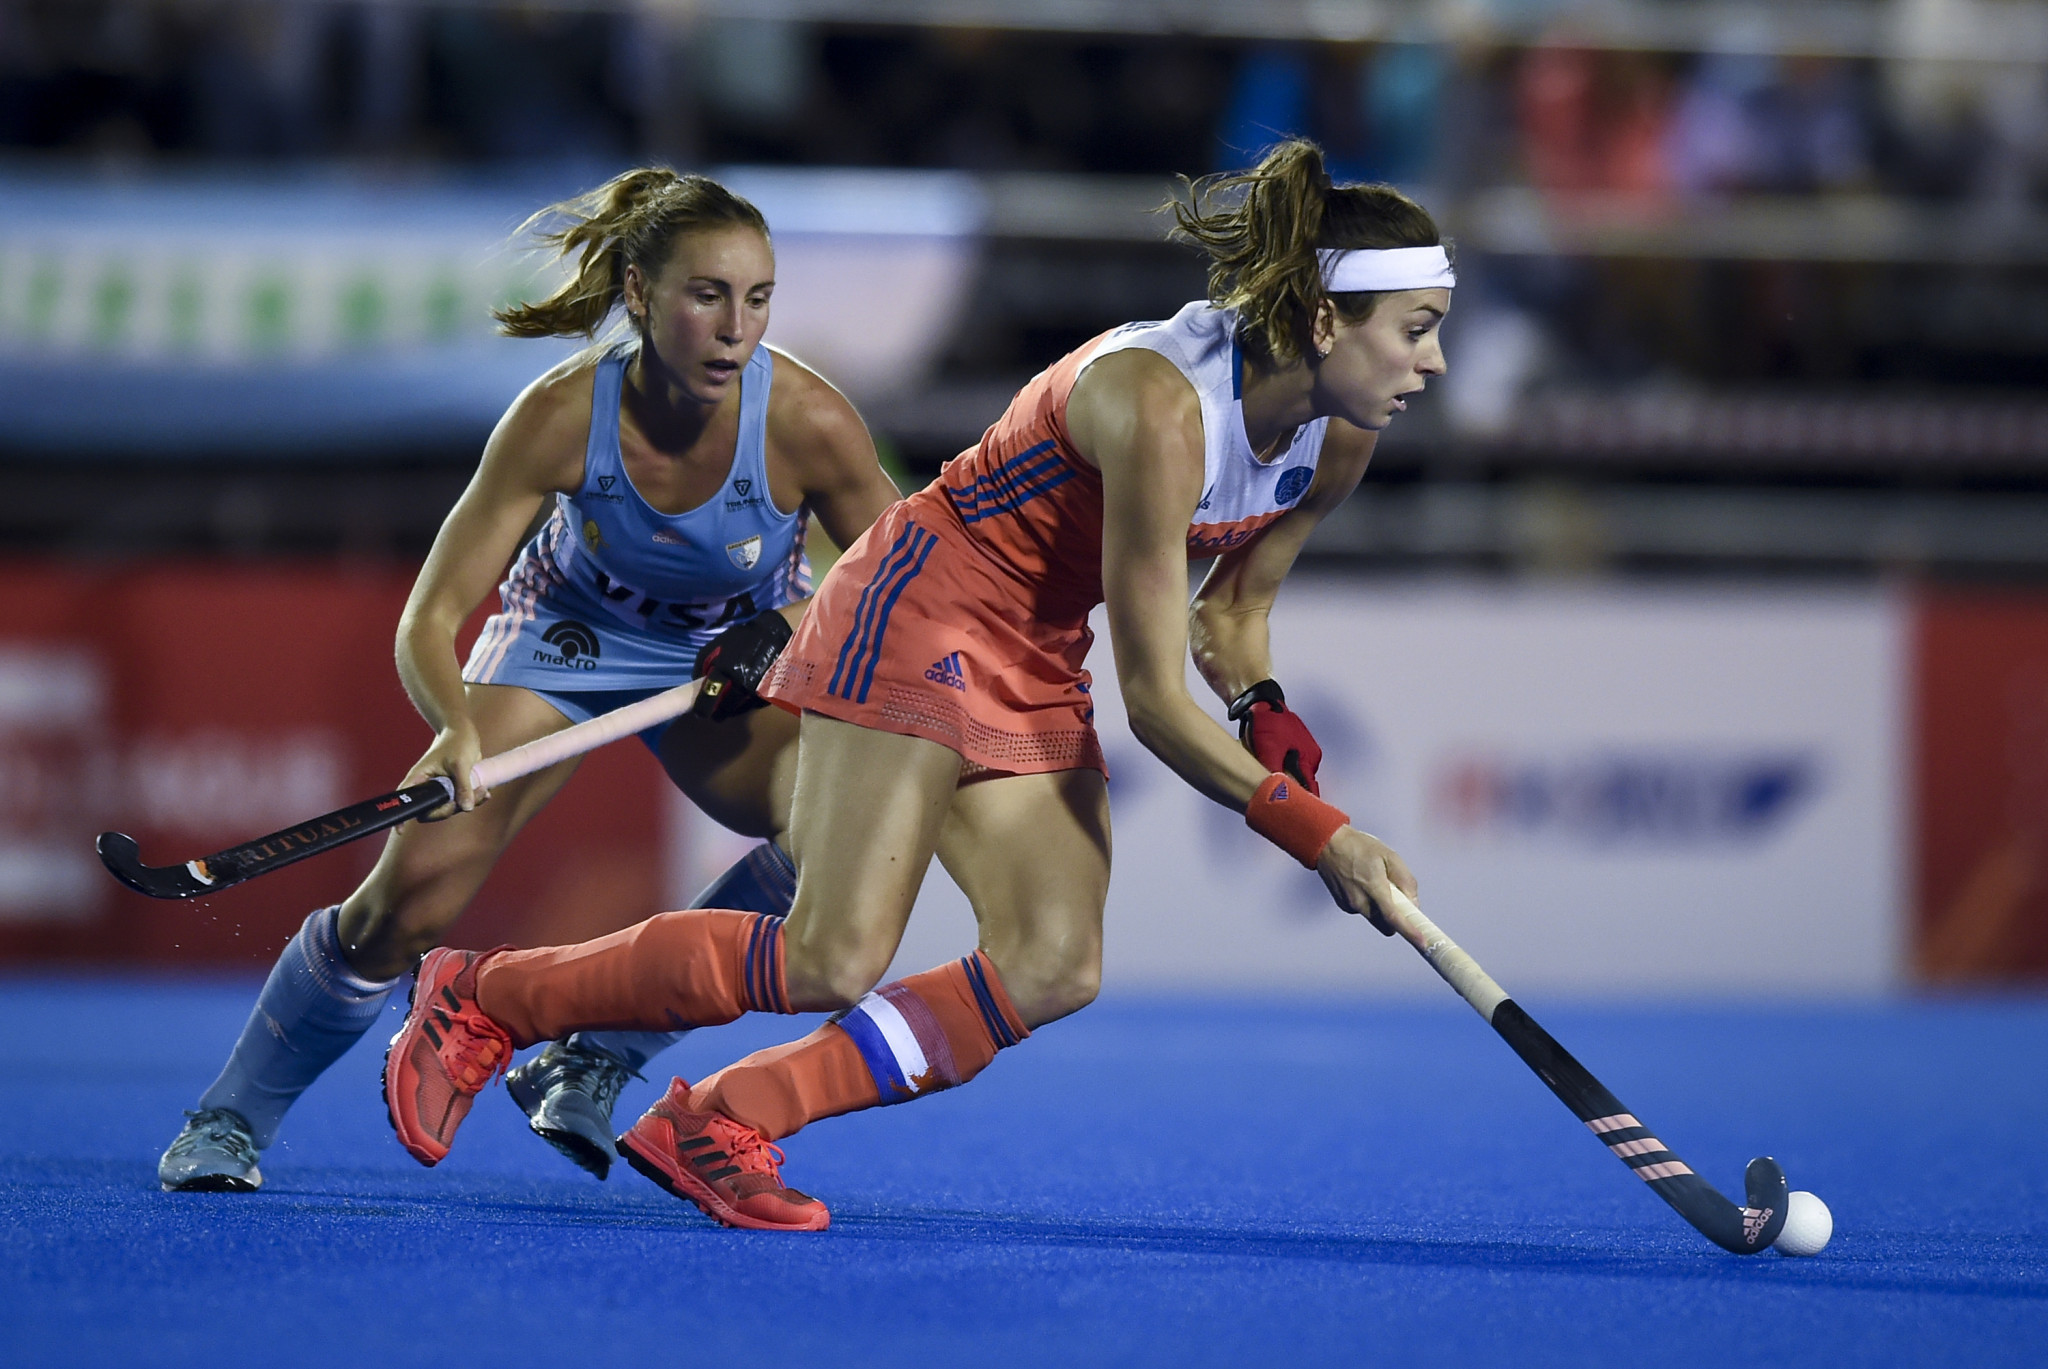 The Netherlands got the better of Argentina in the women's match held in Buenos Aires ©Getty Images